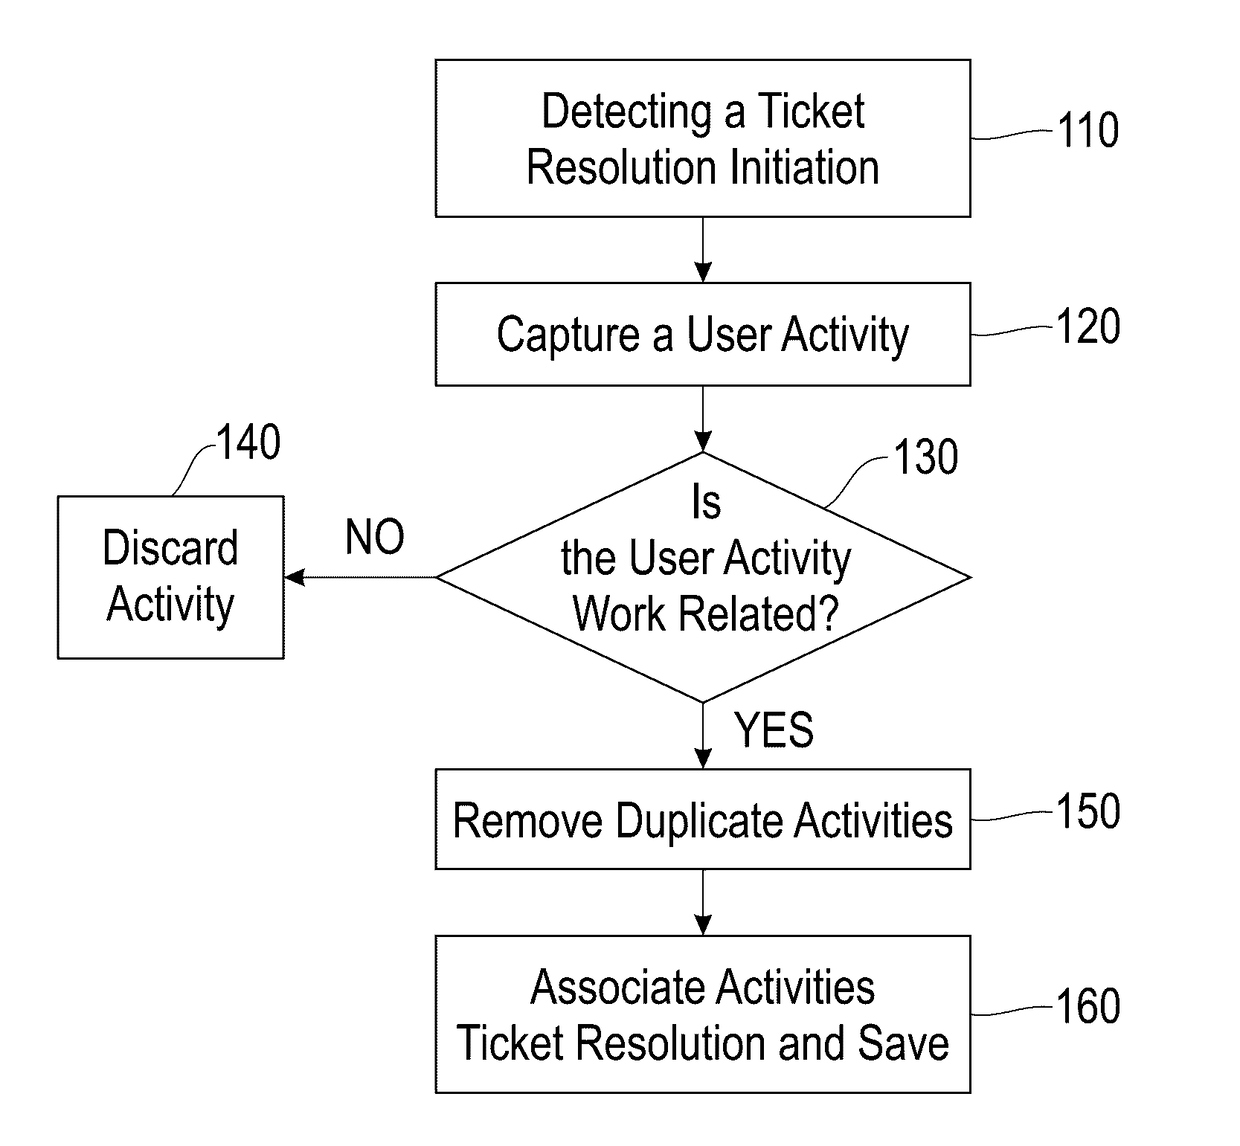 Capturing and identifying important steps during the ticket resolution process